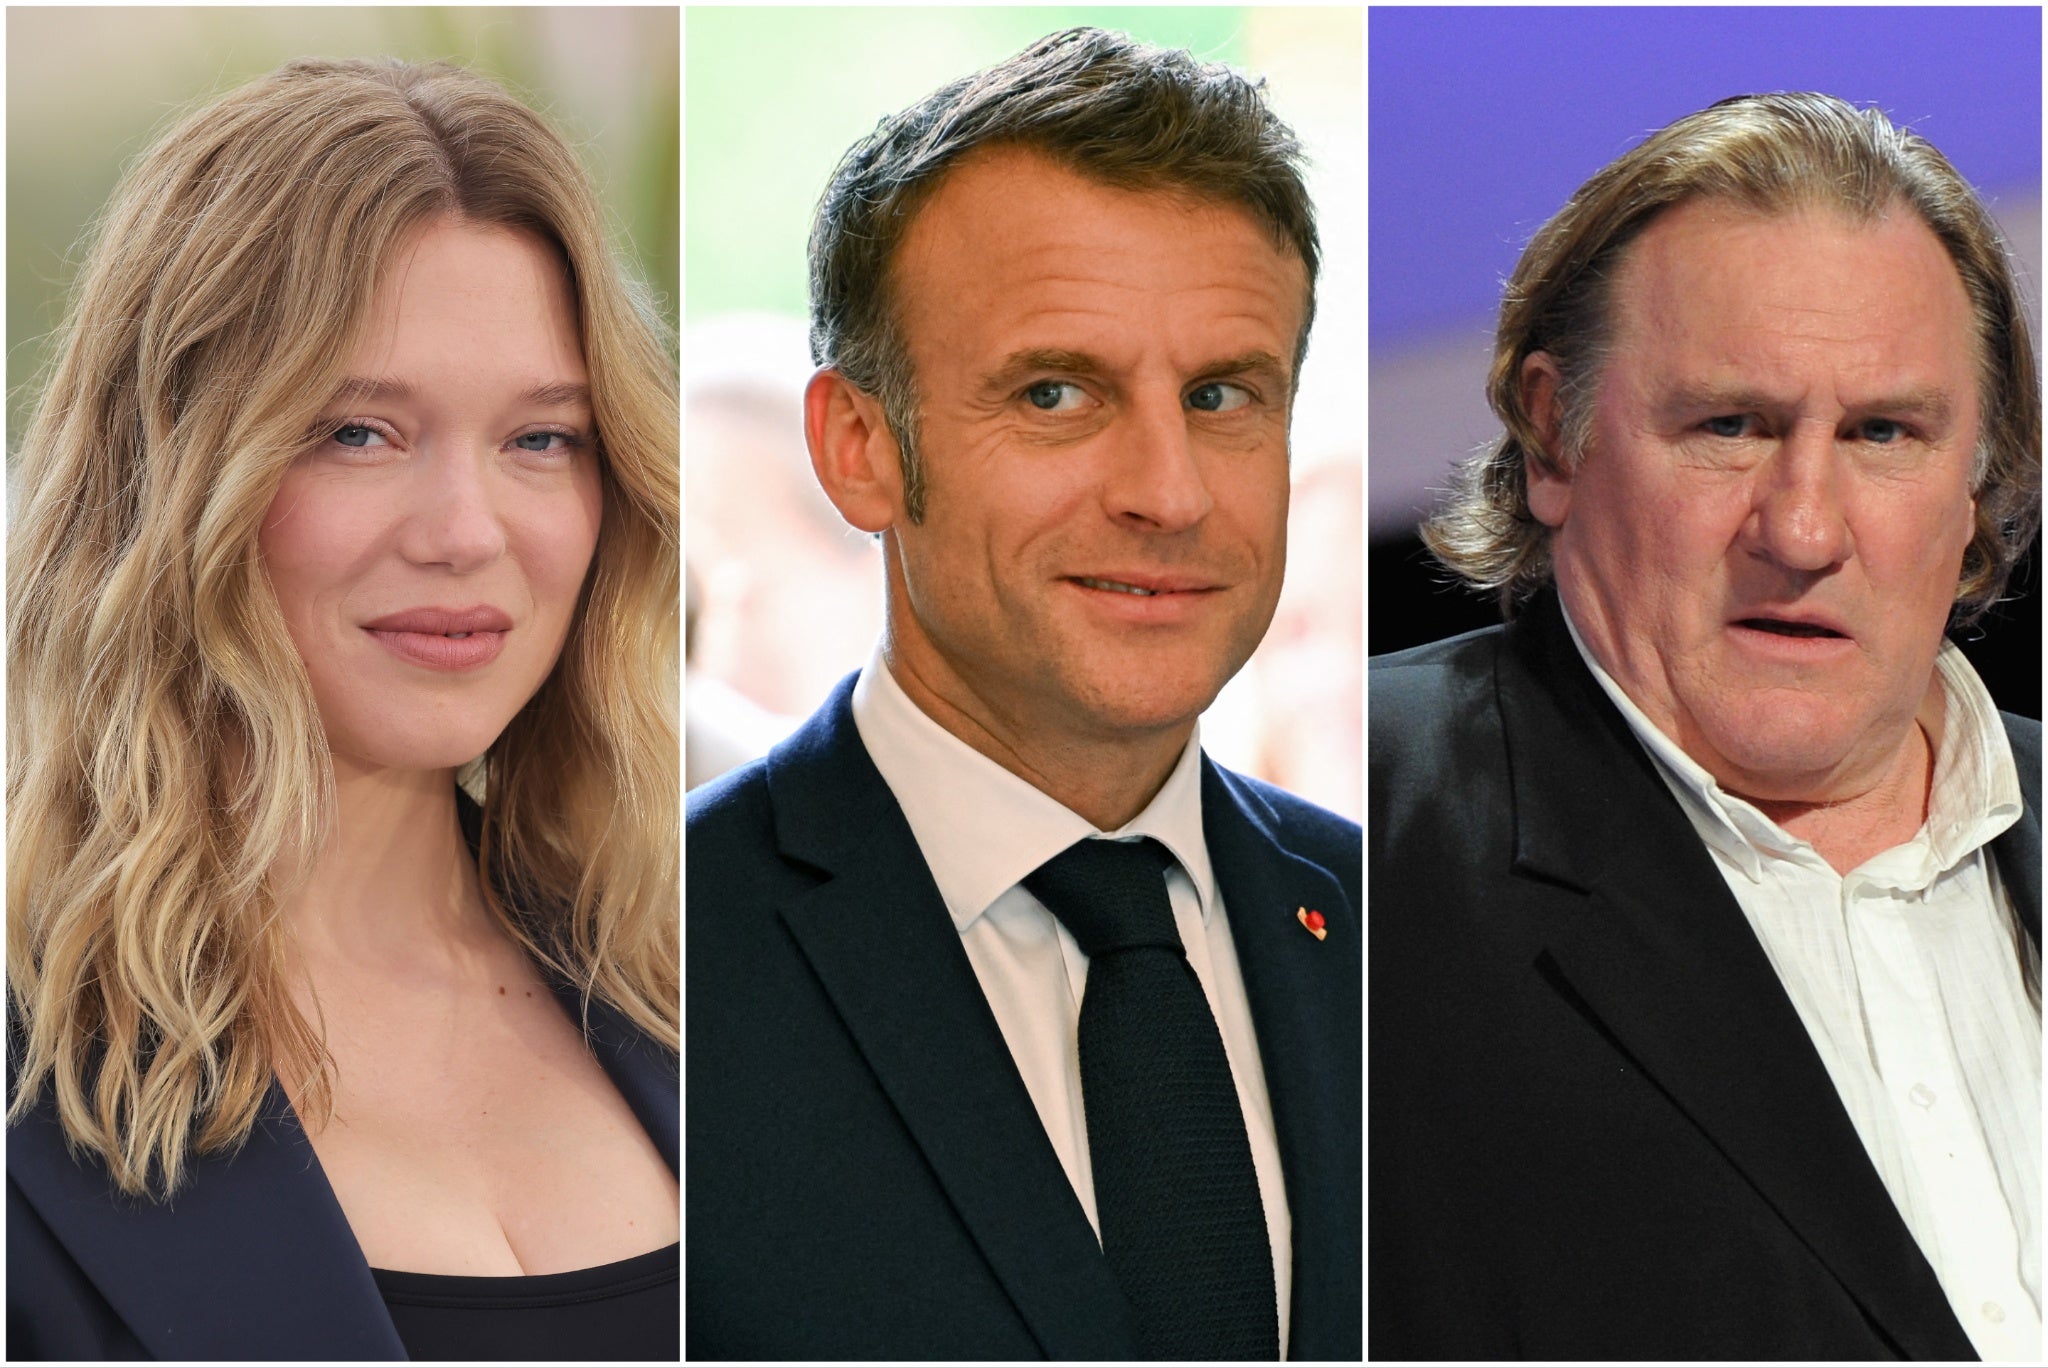 Lea Seydoux criticised French president Emmanuel Macron’s comments in defence of Gerard Depardieu